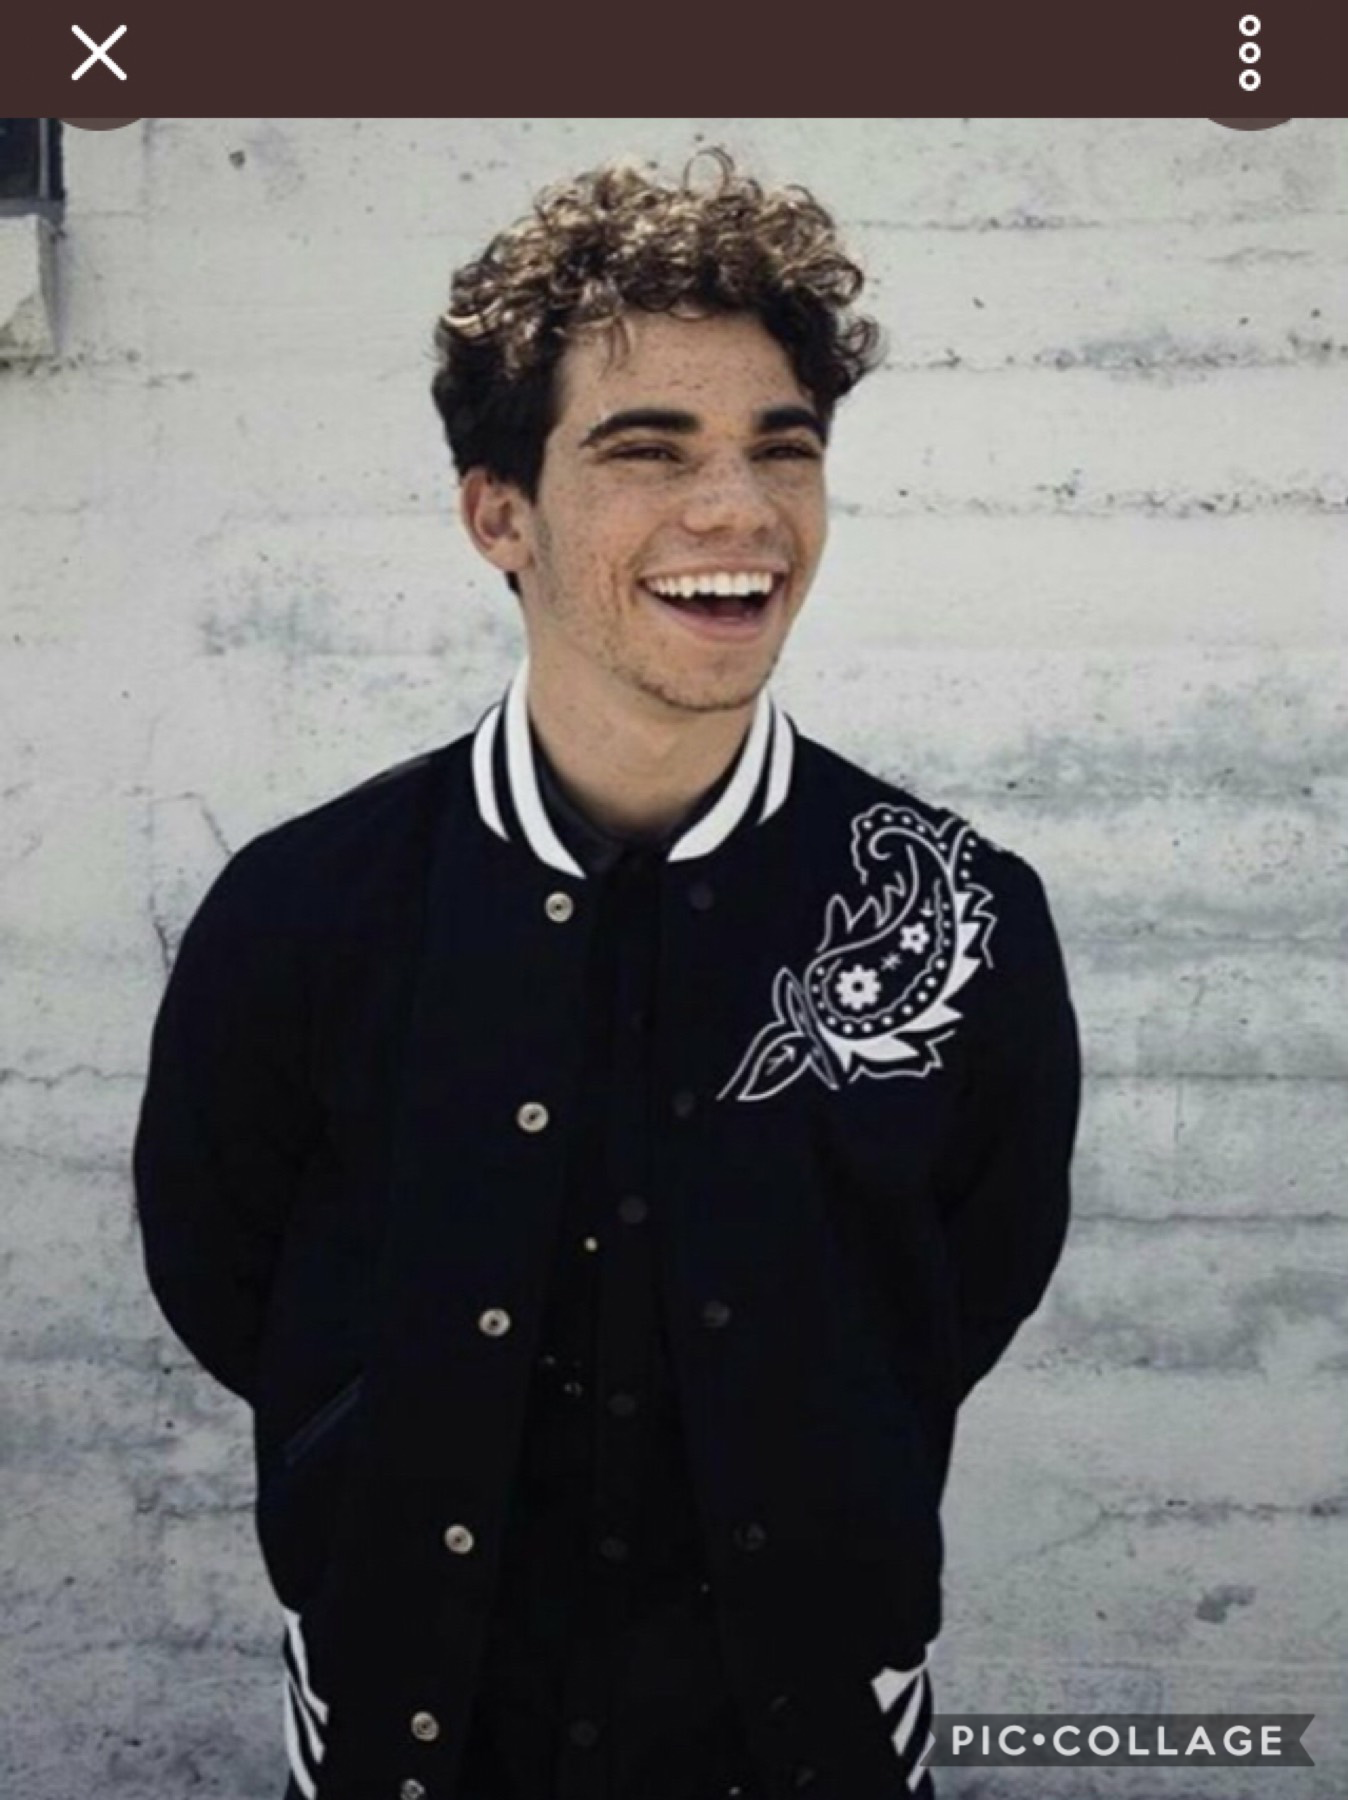 wow, i really can't believe he died. he was only 20 and had so much. i've almost cried so many times today. i hope you know just how much you were loved💛rest in peace cameron boyce😭😭